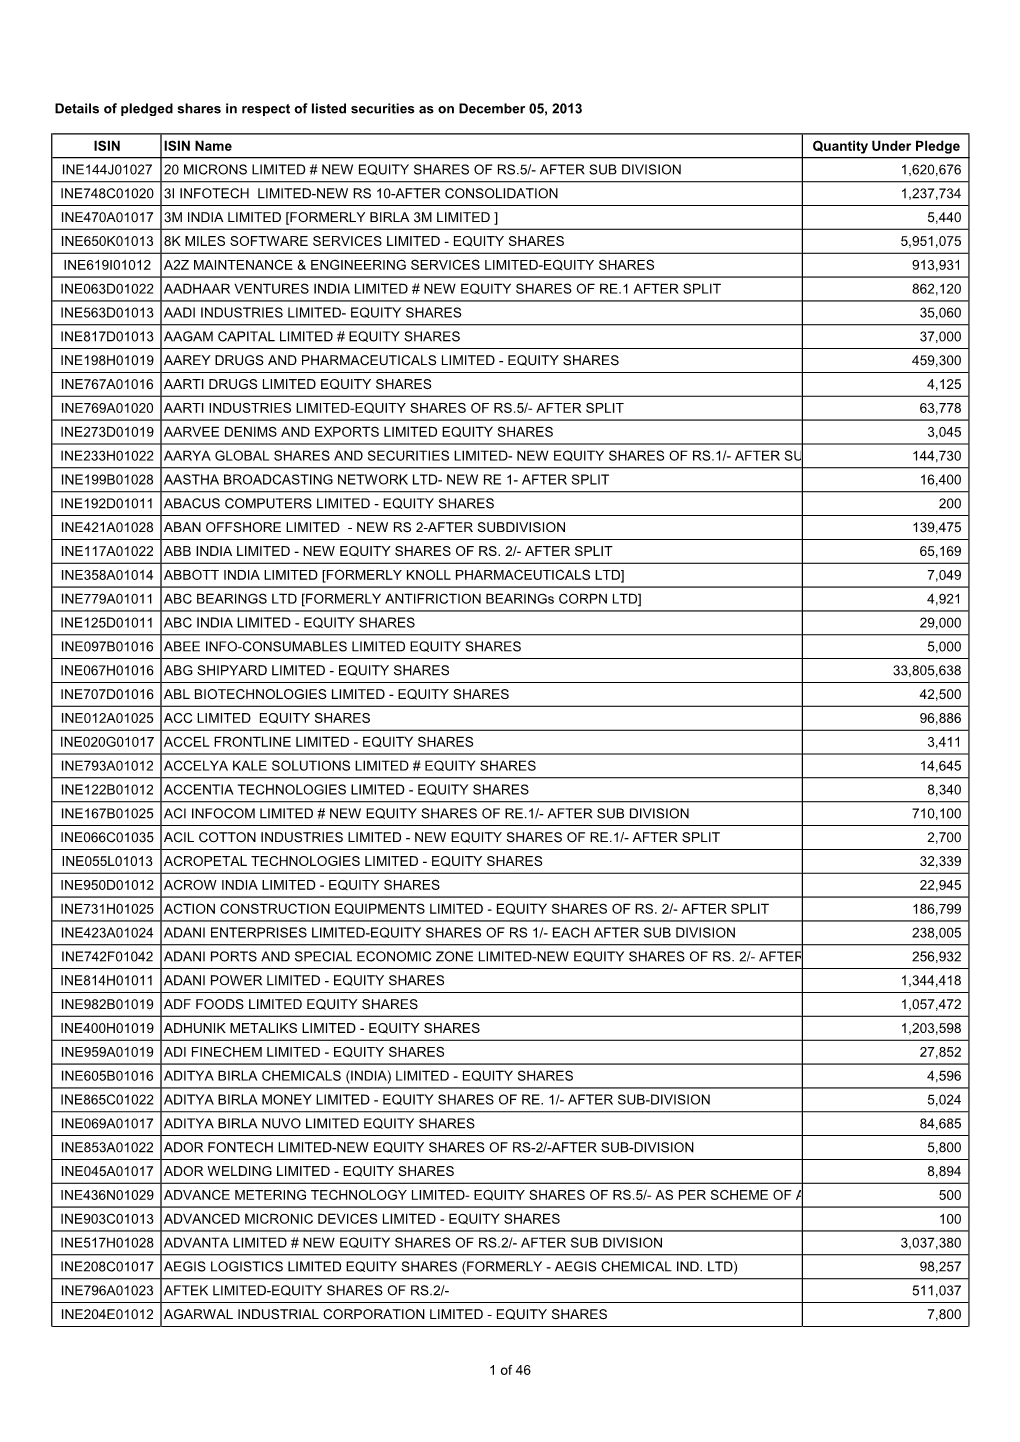 Details of Pledged Shares in Respect of Listed Securities As on December 05, 2013